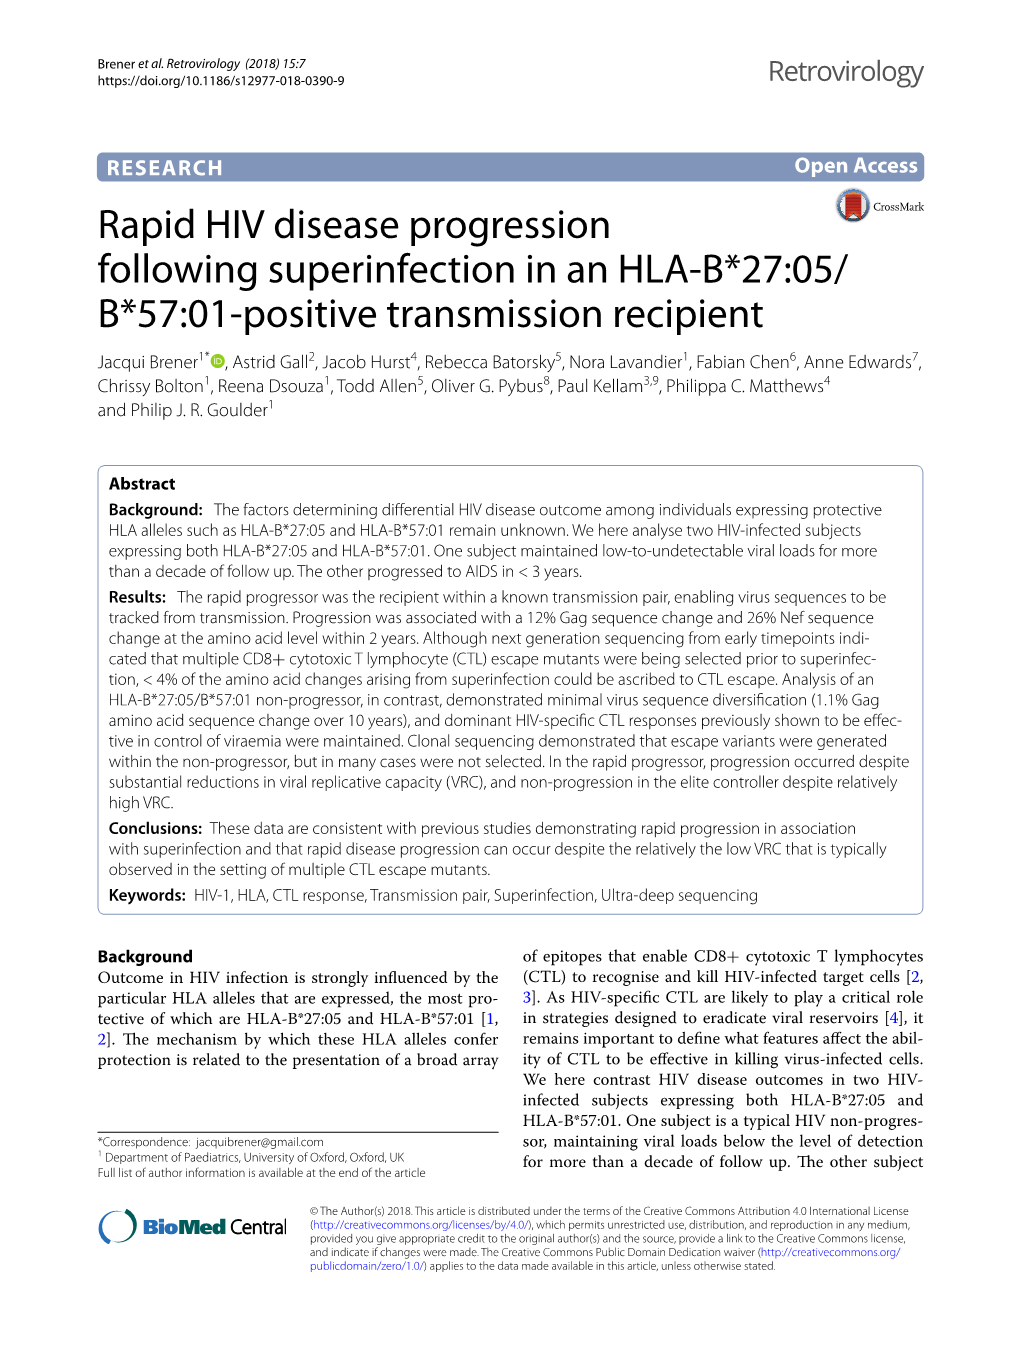 Rapid HIV Disease Progression Following Superinfection in an HLA